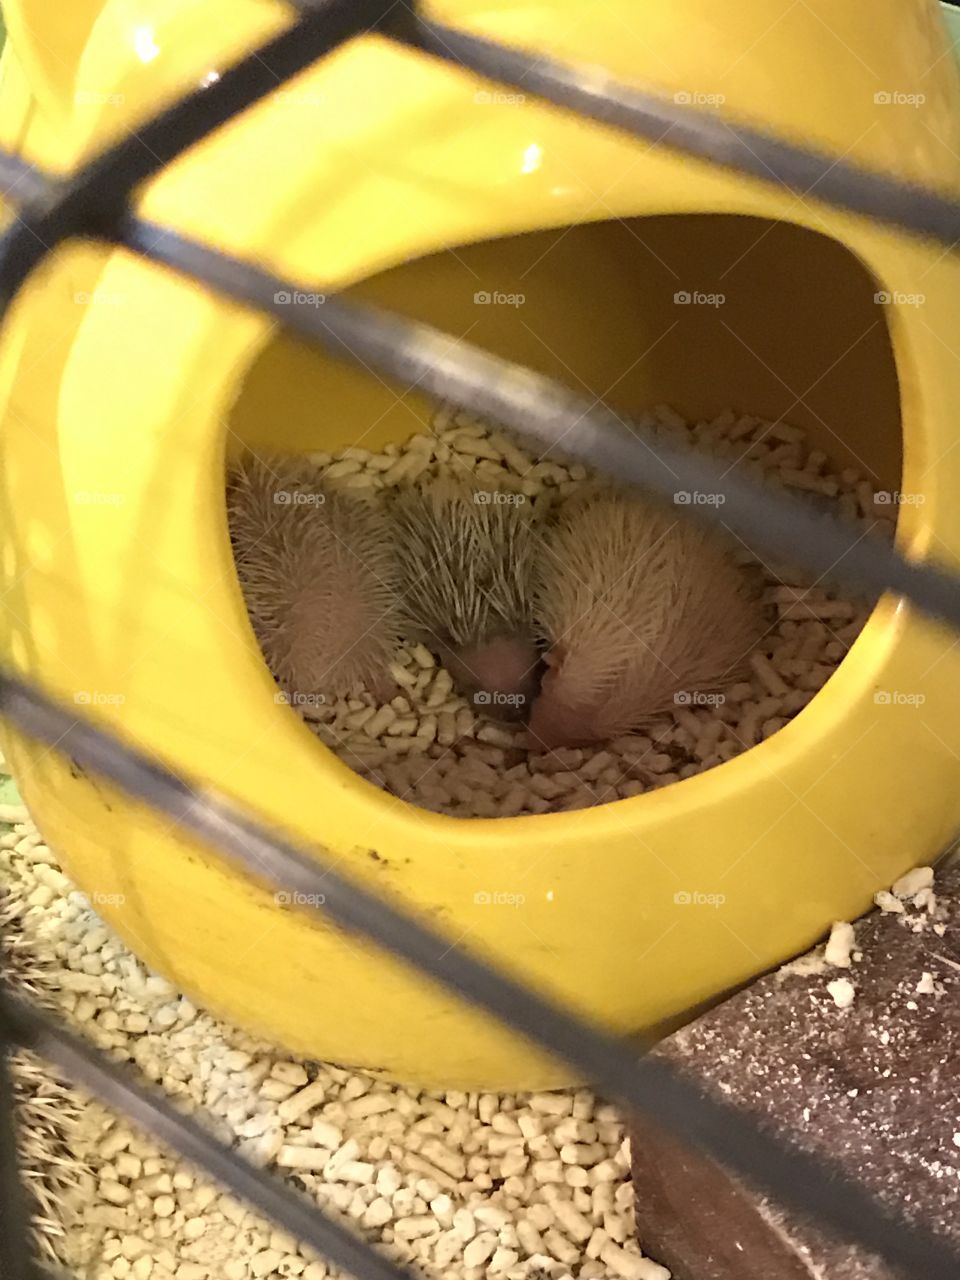 What do you sees? Hedgehog babies